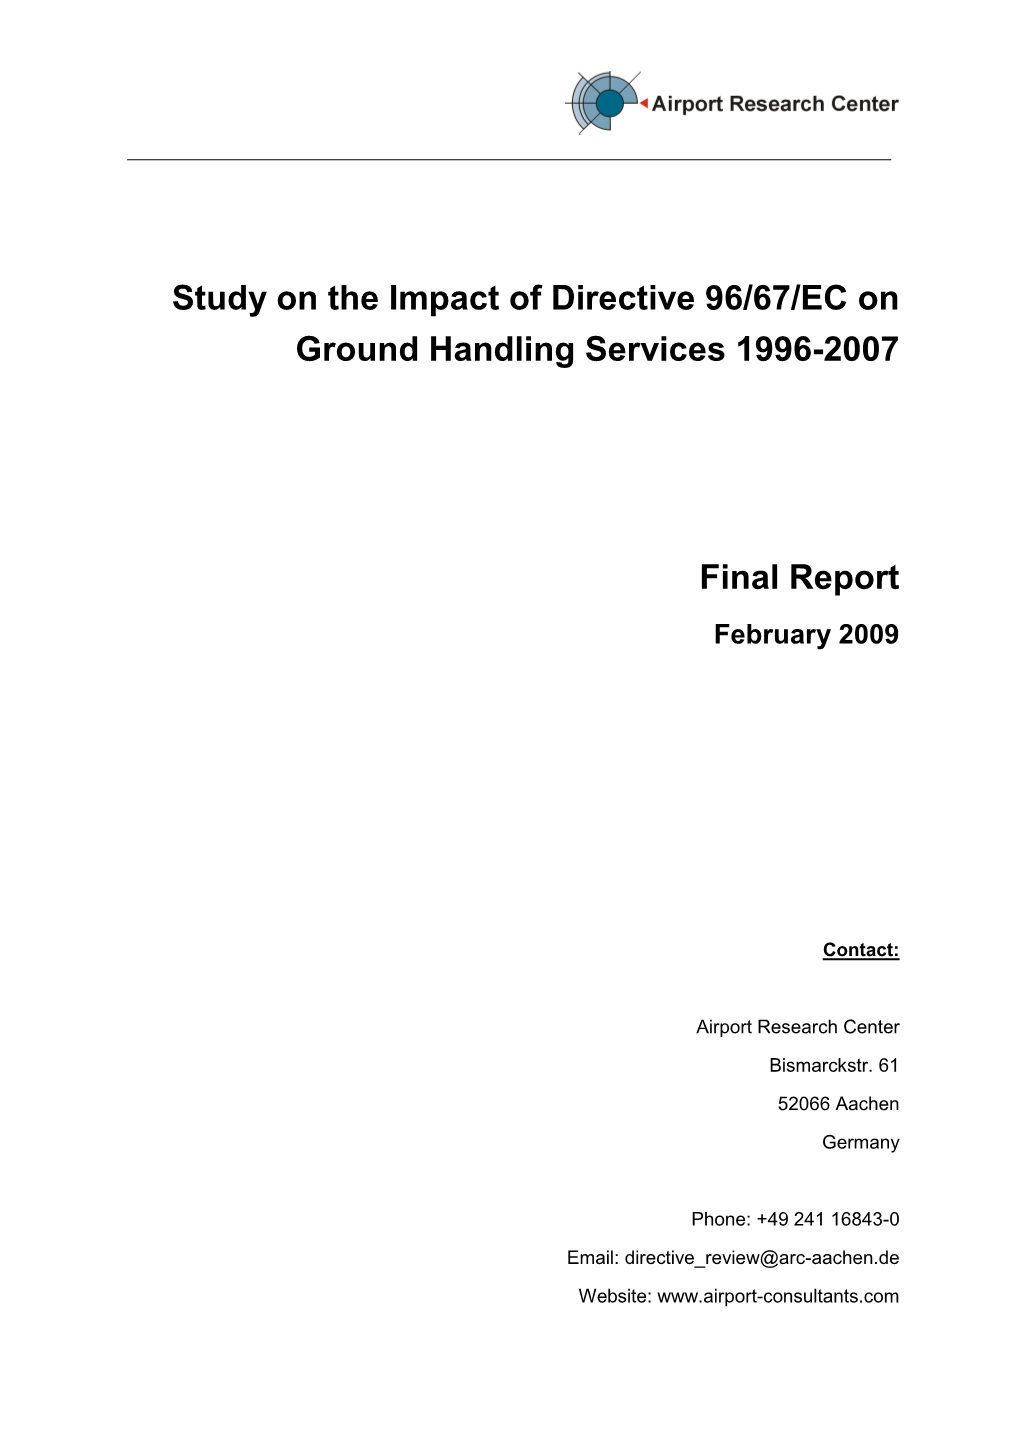 Study on the Impact of Directive 96/67/EC on Ground Handling Services 1996-2007